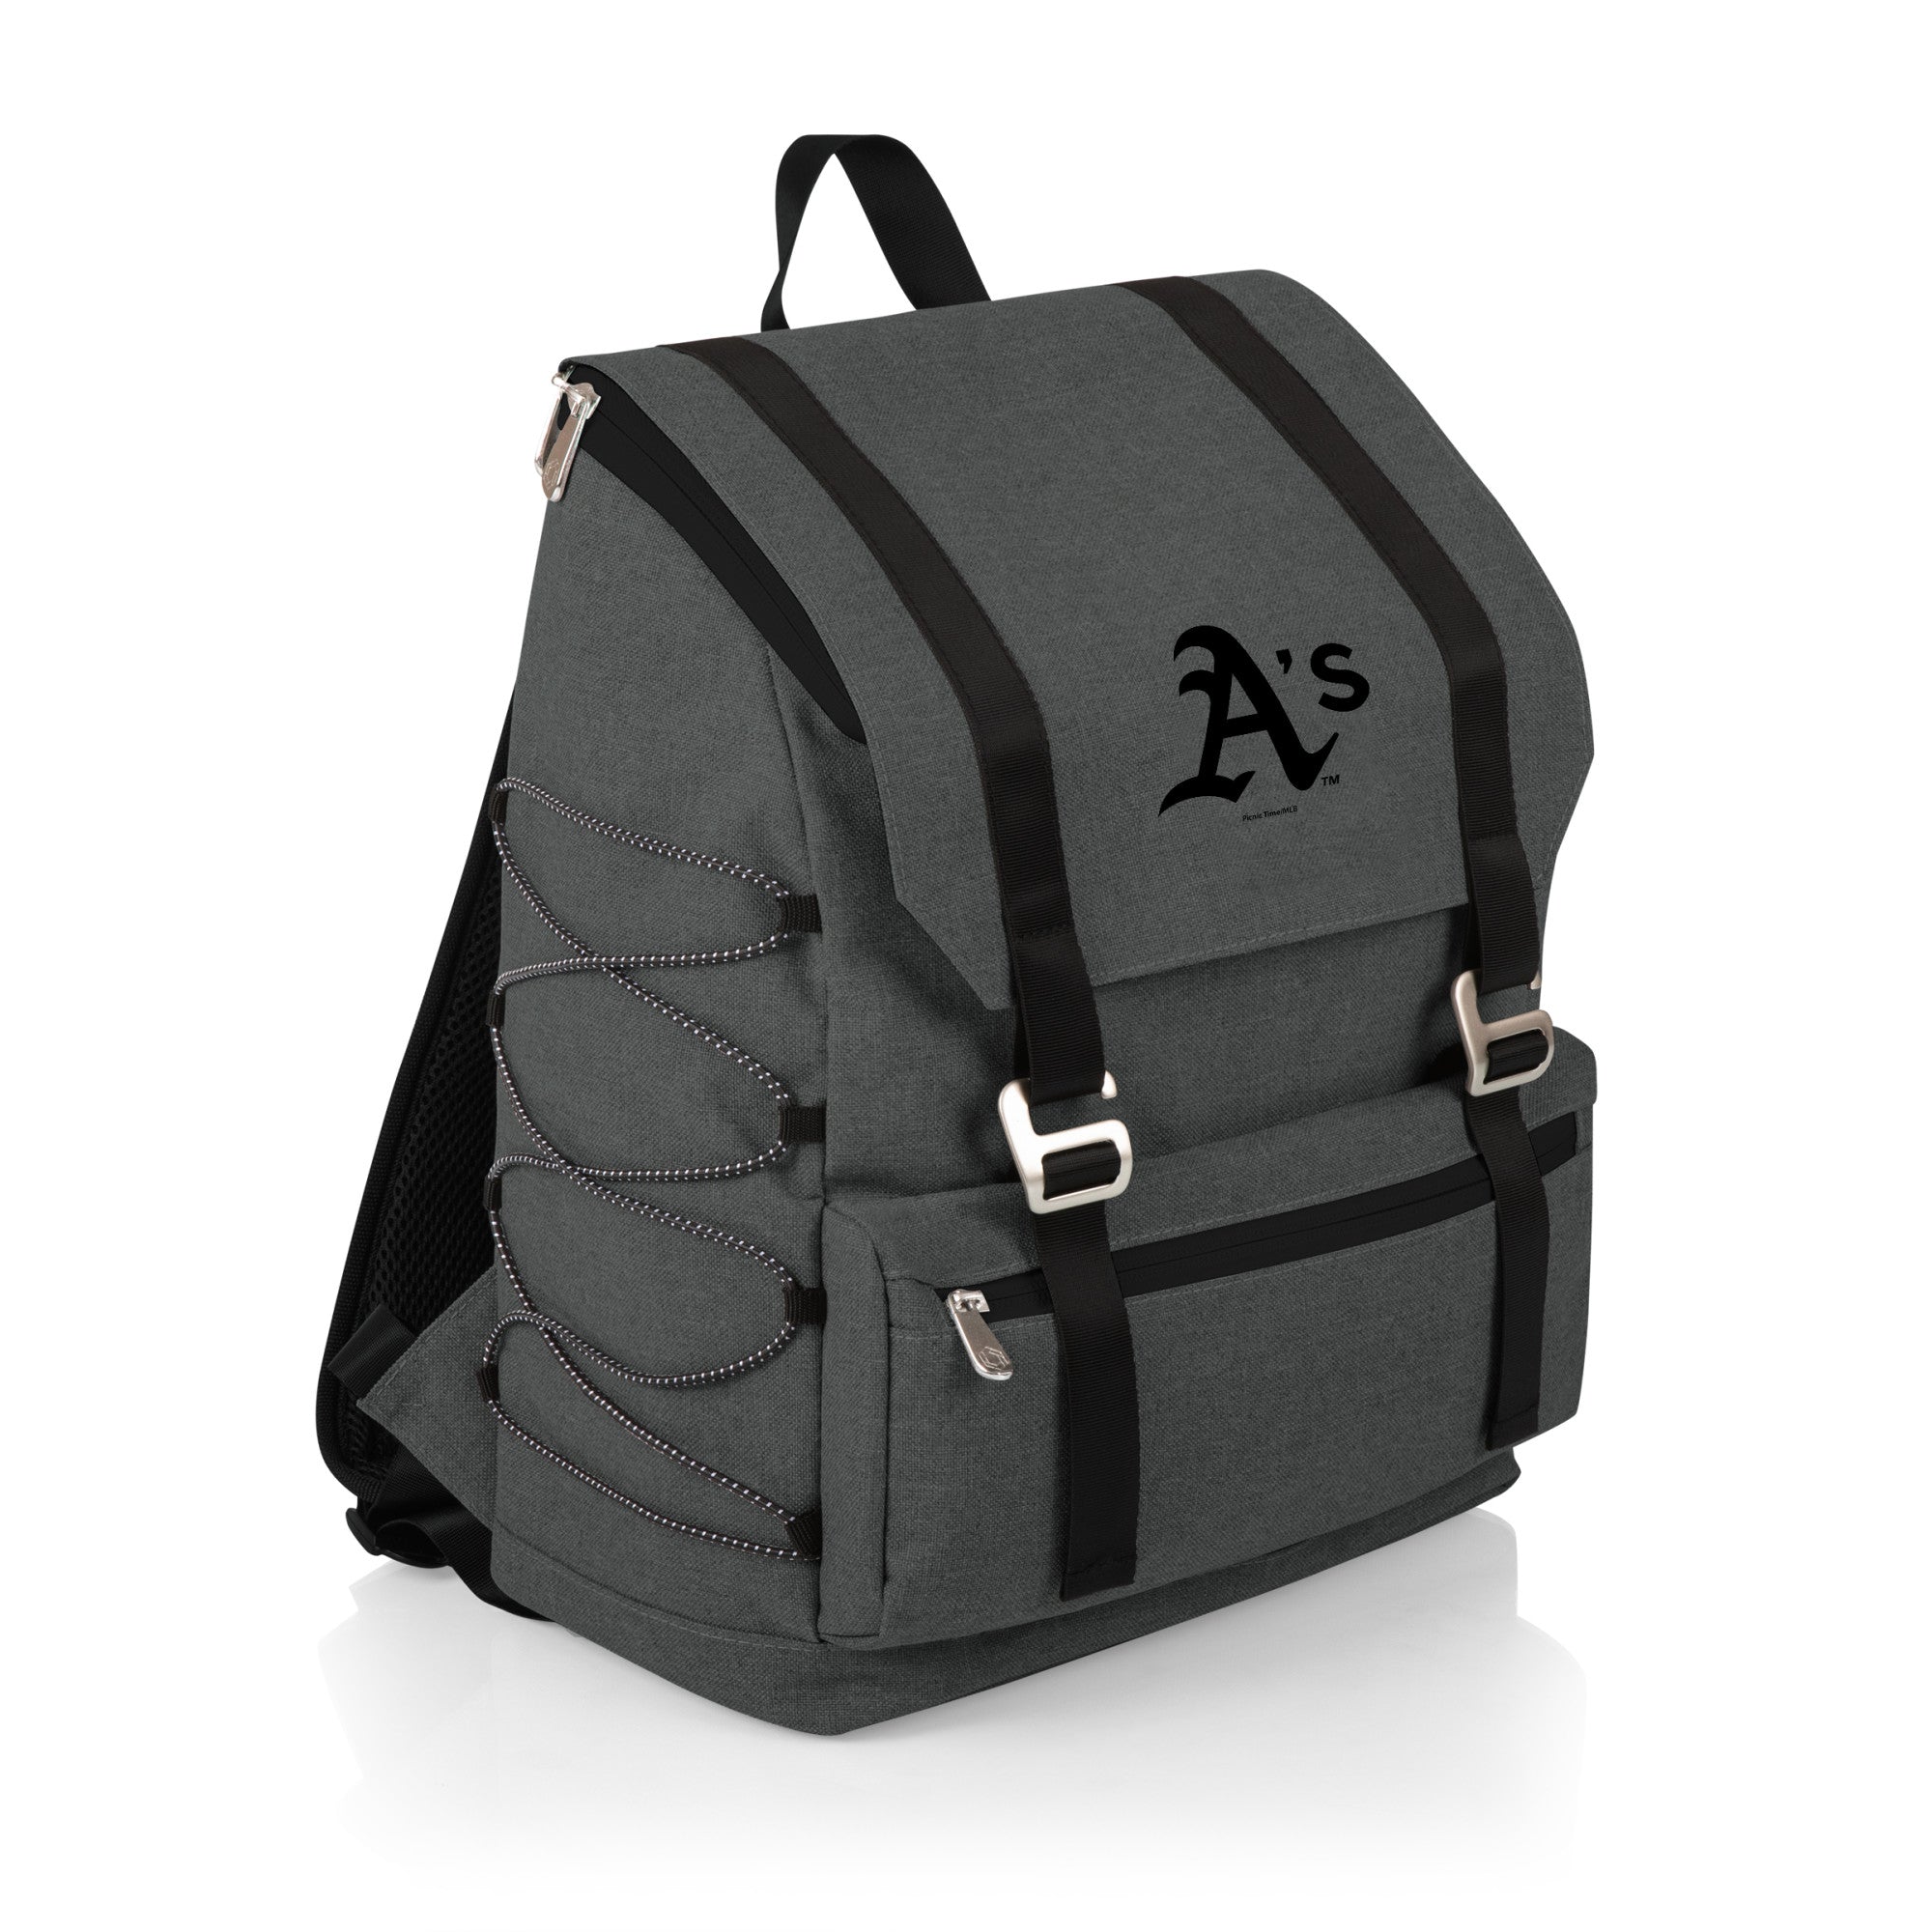 Oakland Athletics - On The Go Traverse Backpack Cooler